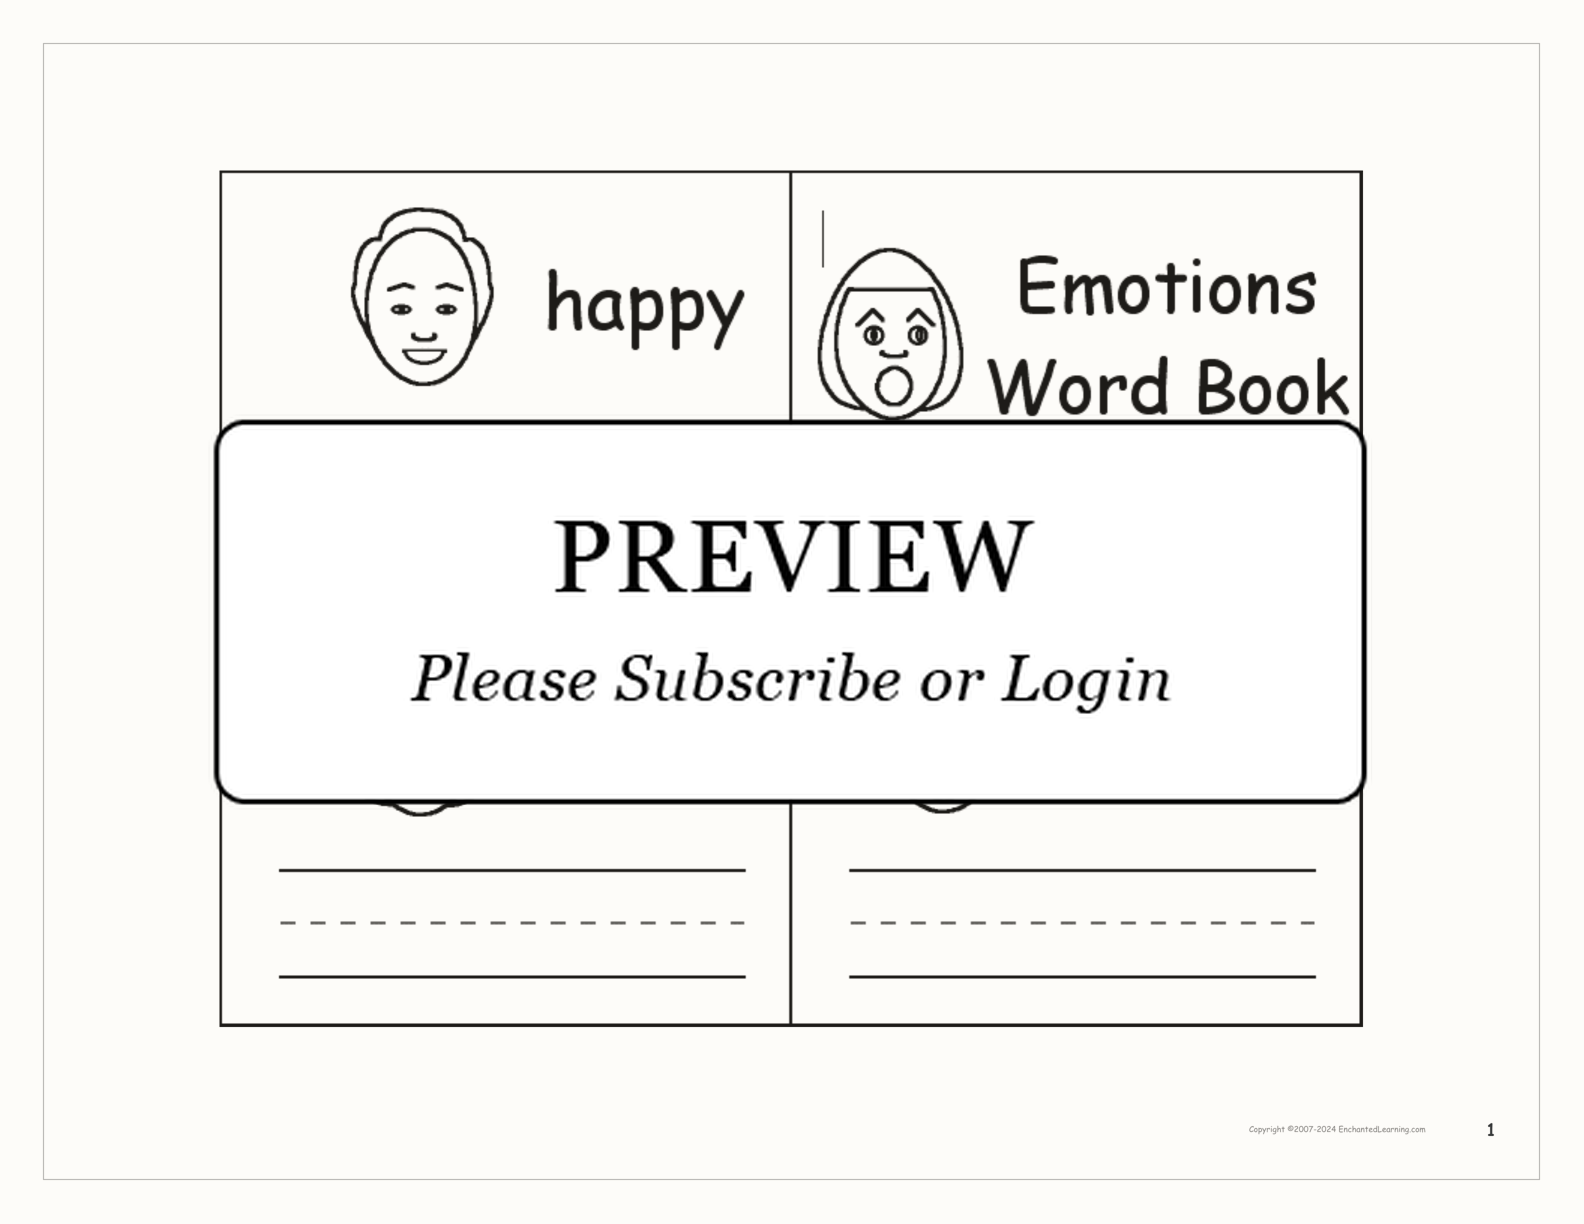 Emotions Word Book interactive printout page 1